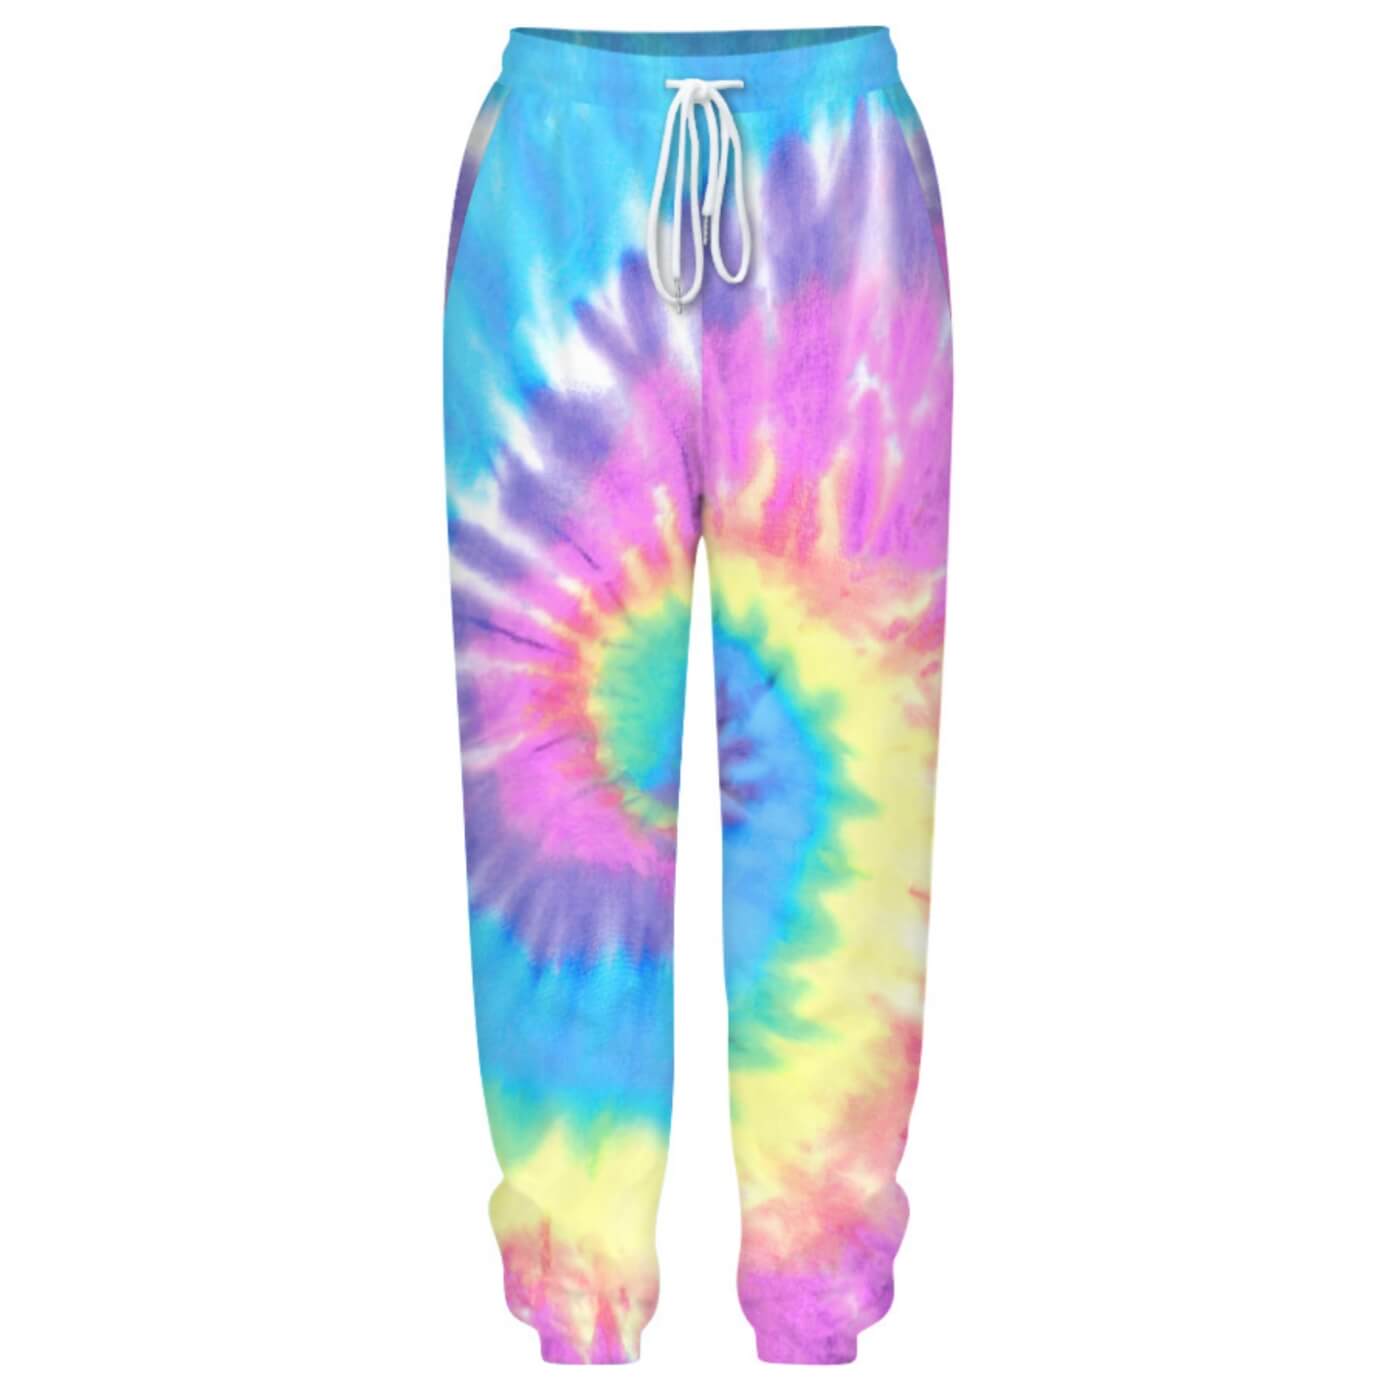 Hummingbird Tie Dye Print Drawstring Joggers - Spiral features loose fit with elastic waistband and cuffed hem, an adjustable drawstring and side pockets. Perfect for any daily activities from workout to casual lounging. Digital printing technology keeps tie dye patterns intact after wear and tear. Complete the look with a sweatshirt, sports bra, crop top, crop tank and more because they go with almost anything in your closet!